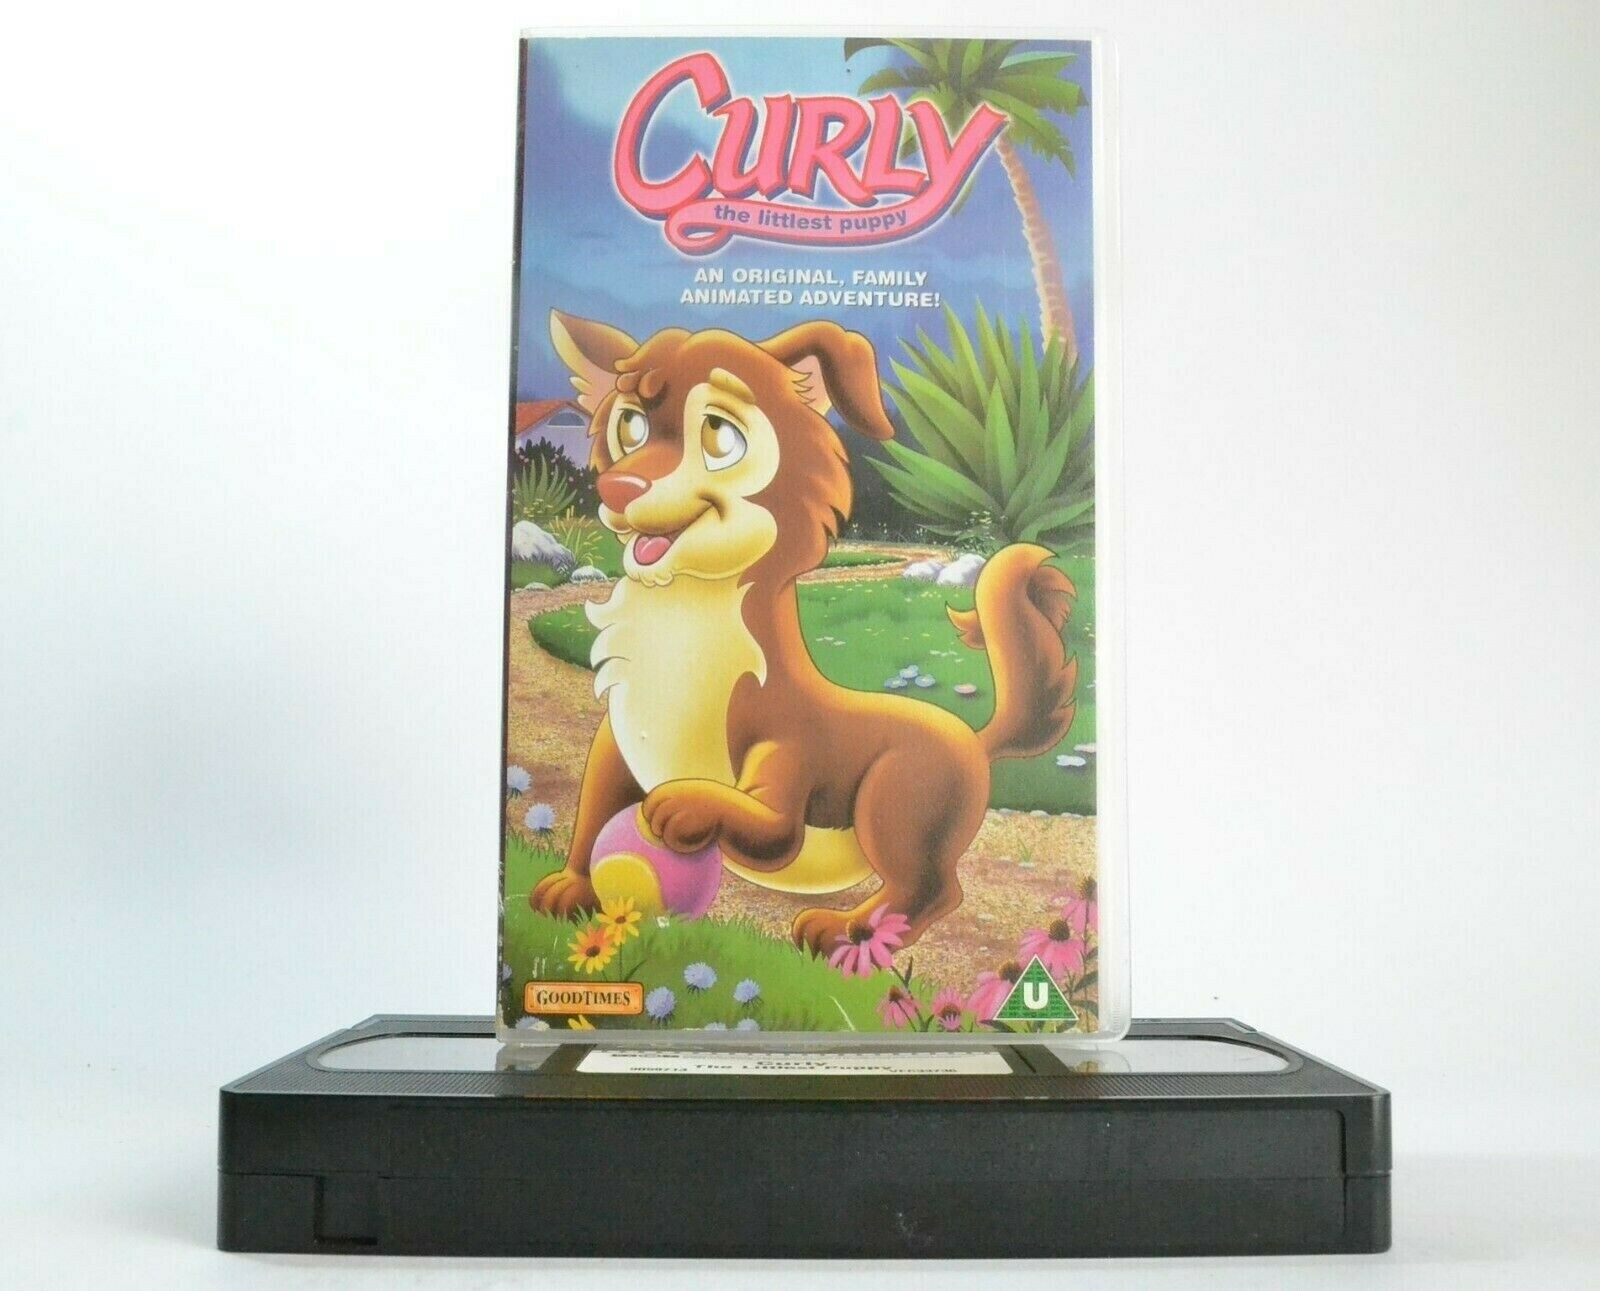 Curly: The Little Puppy [GoodTimes Video] - Animated Adventure - Kids - Pal VHS-